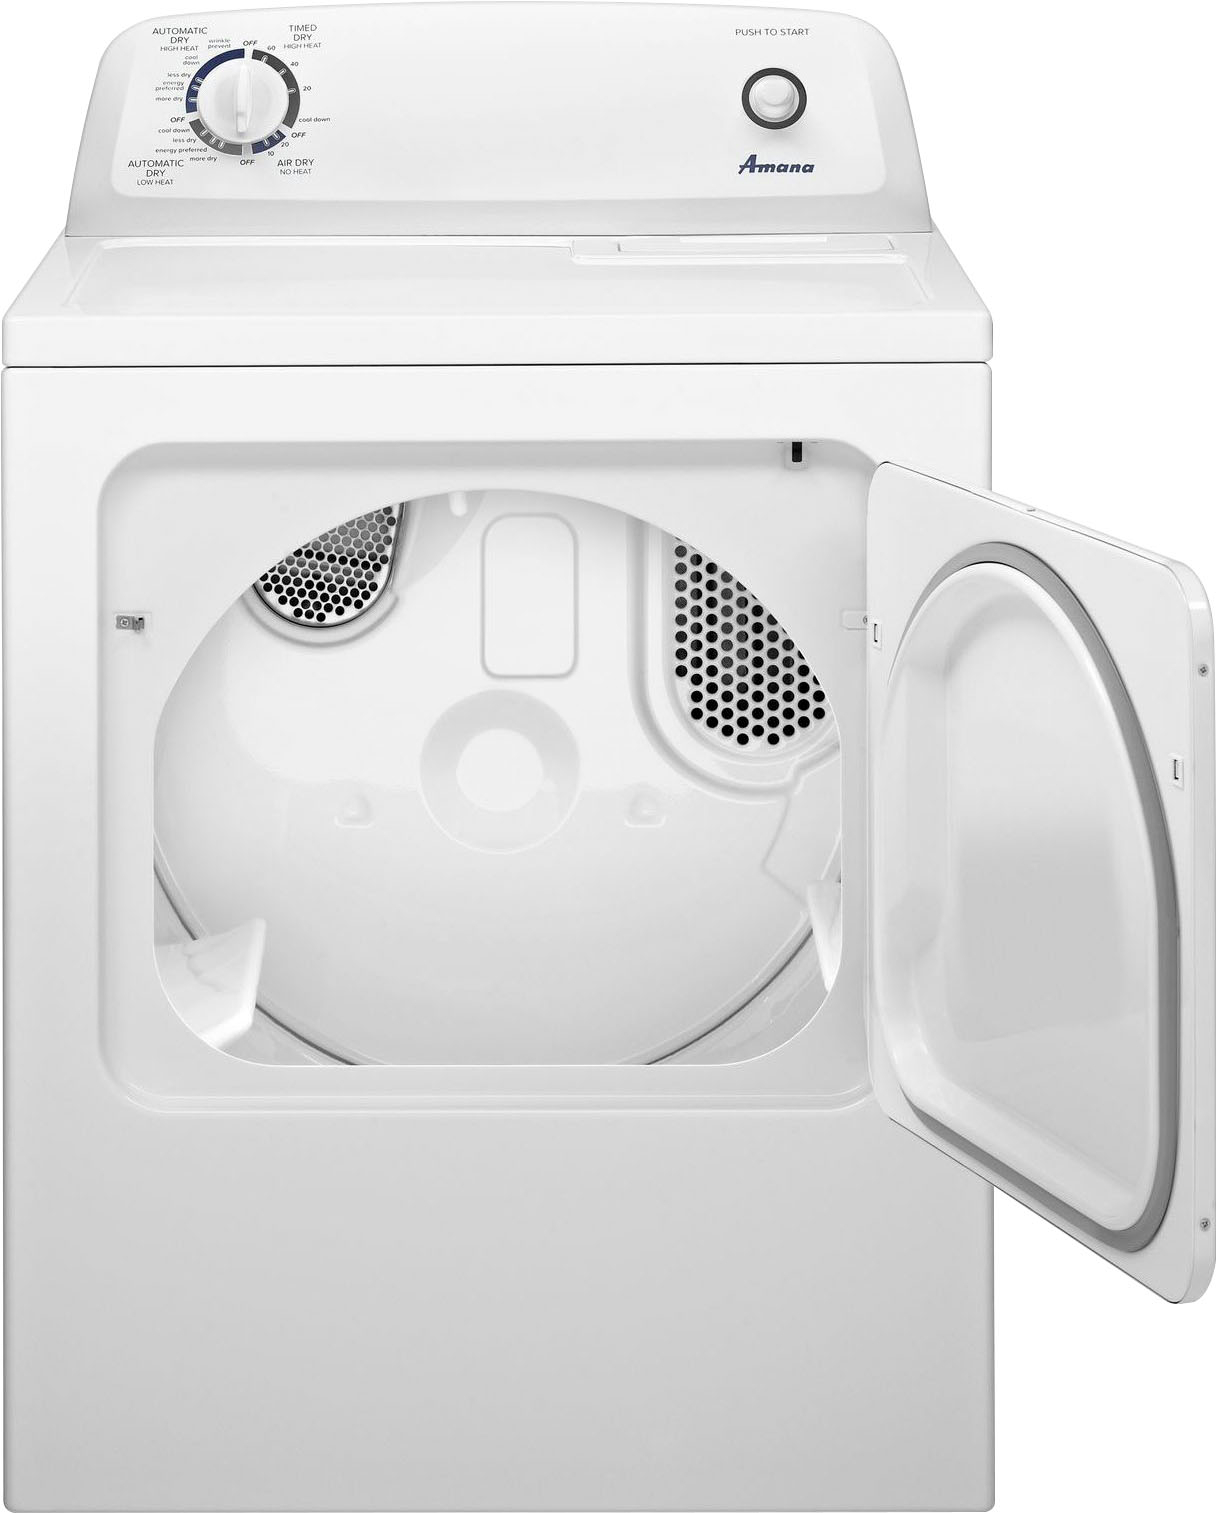 Angle View: Amana - 6.5 Cu. Ft. Electric Dryer with Automatic Dryness Control - White